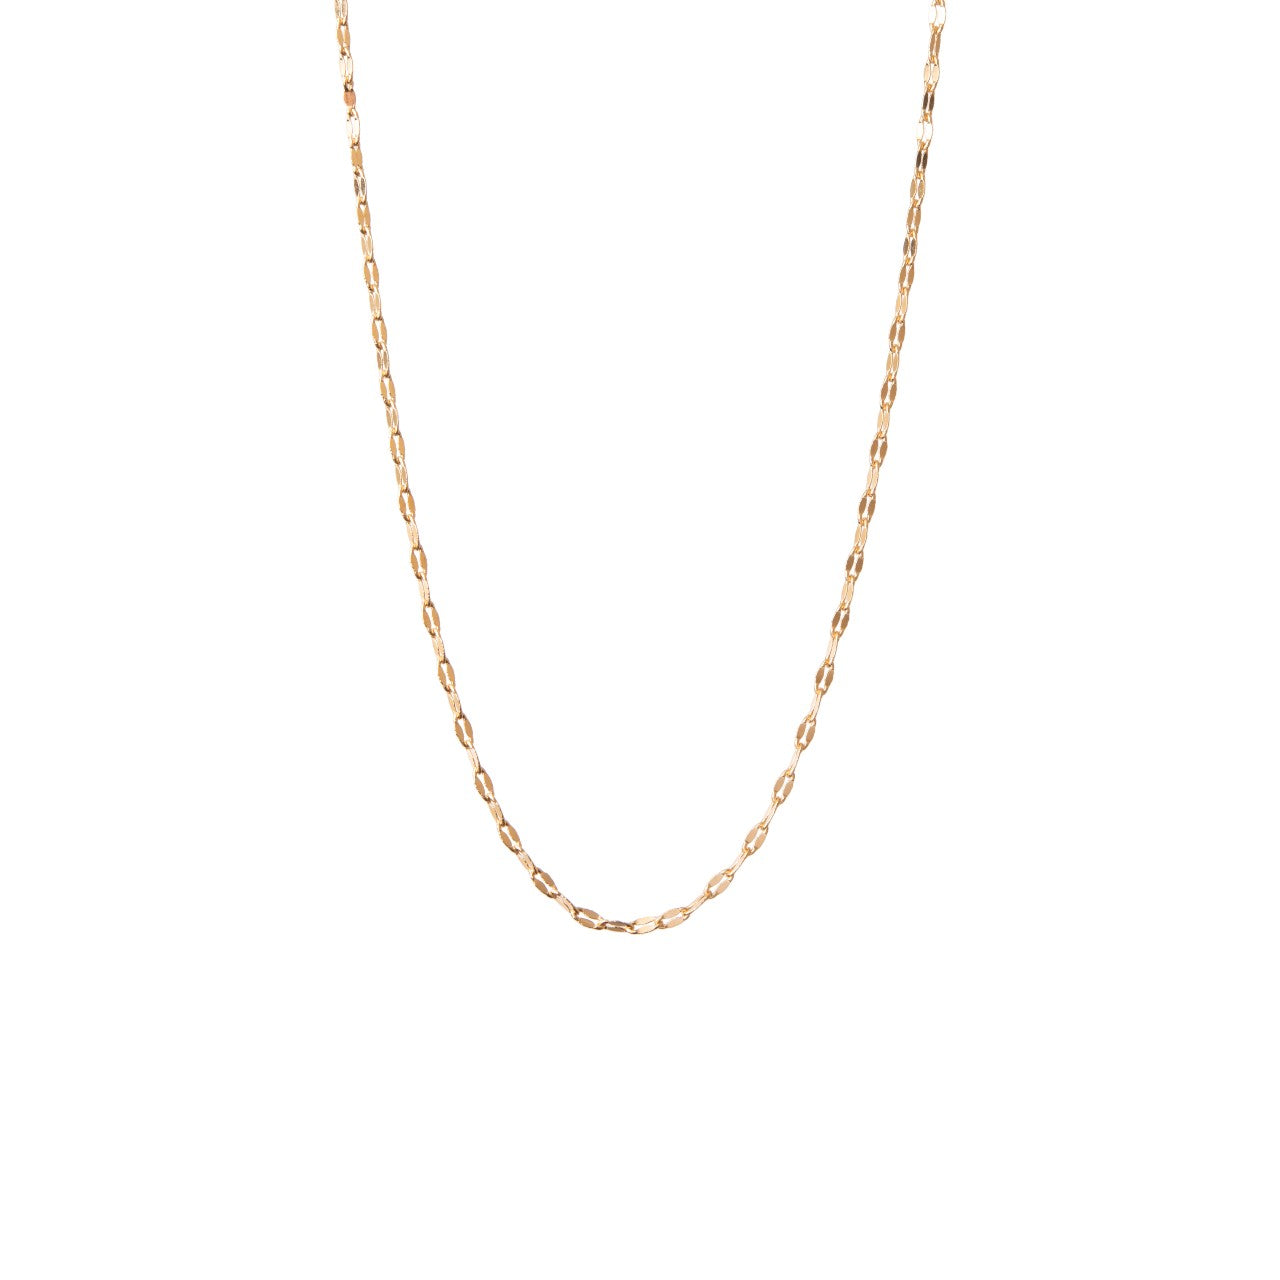 Vintage Style Chain (Gold Plated)